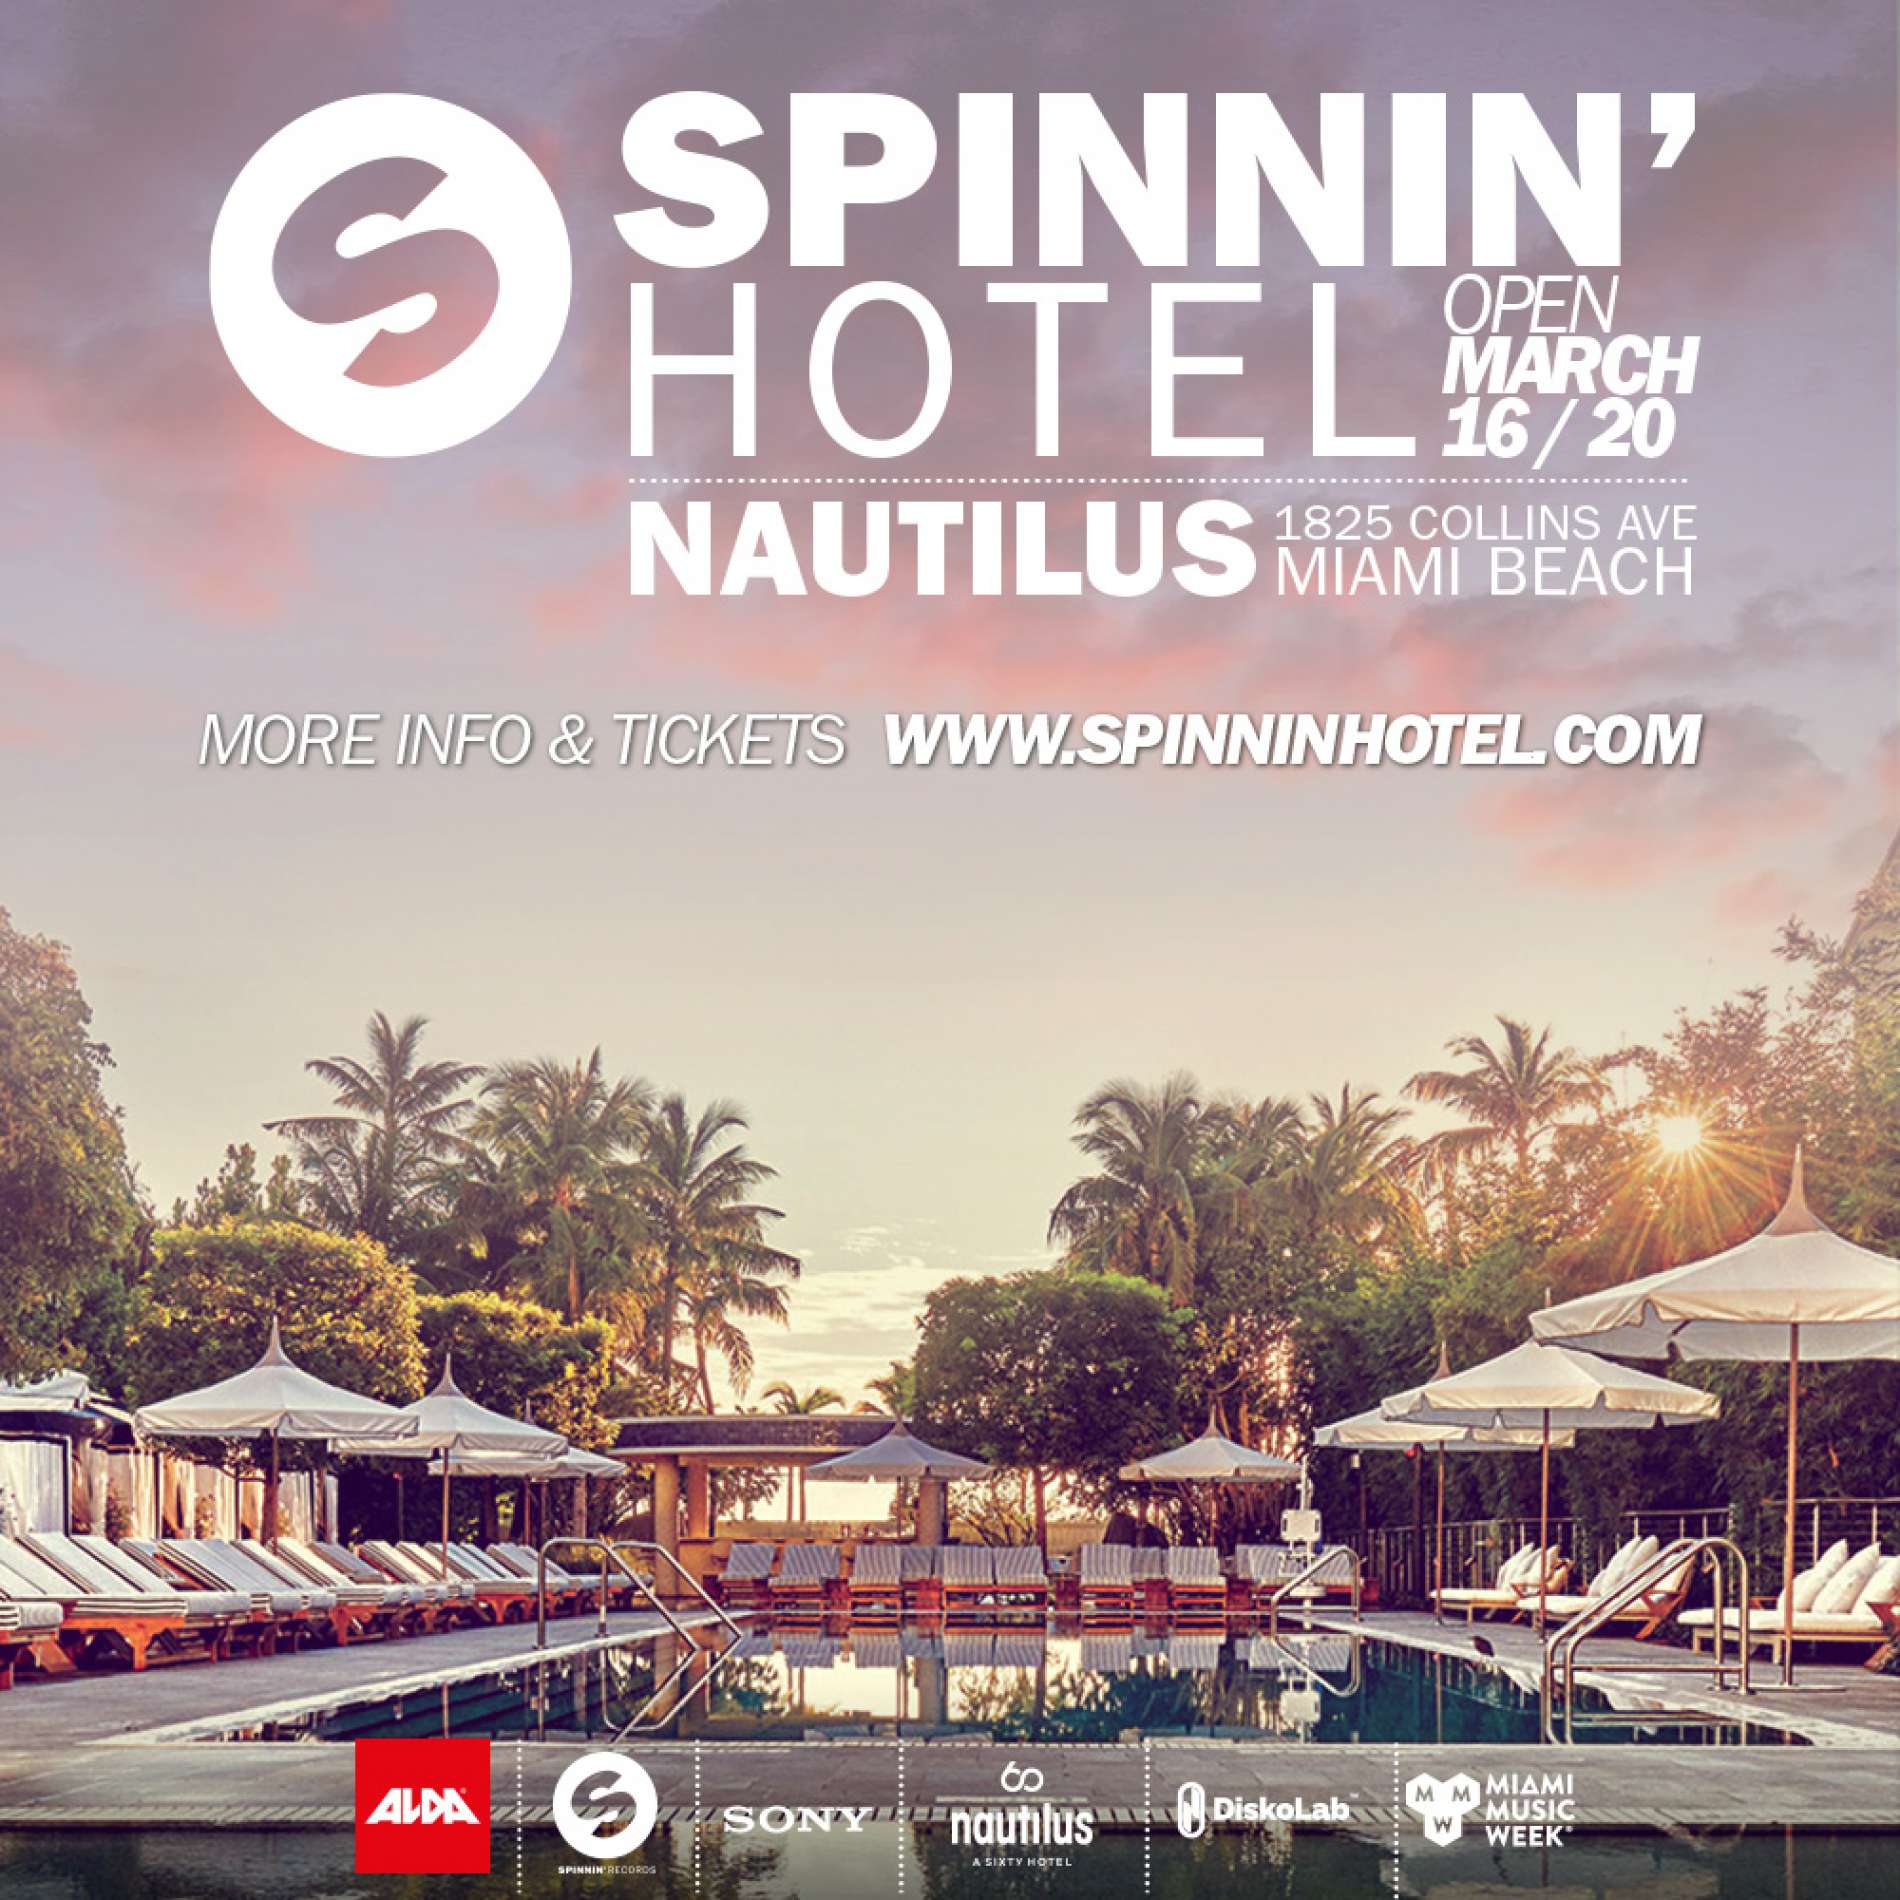 Win a trip to the Spinnin' Hotel!